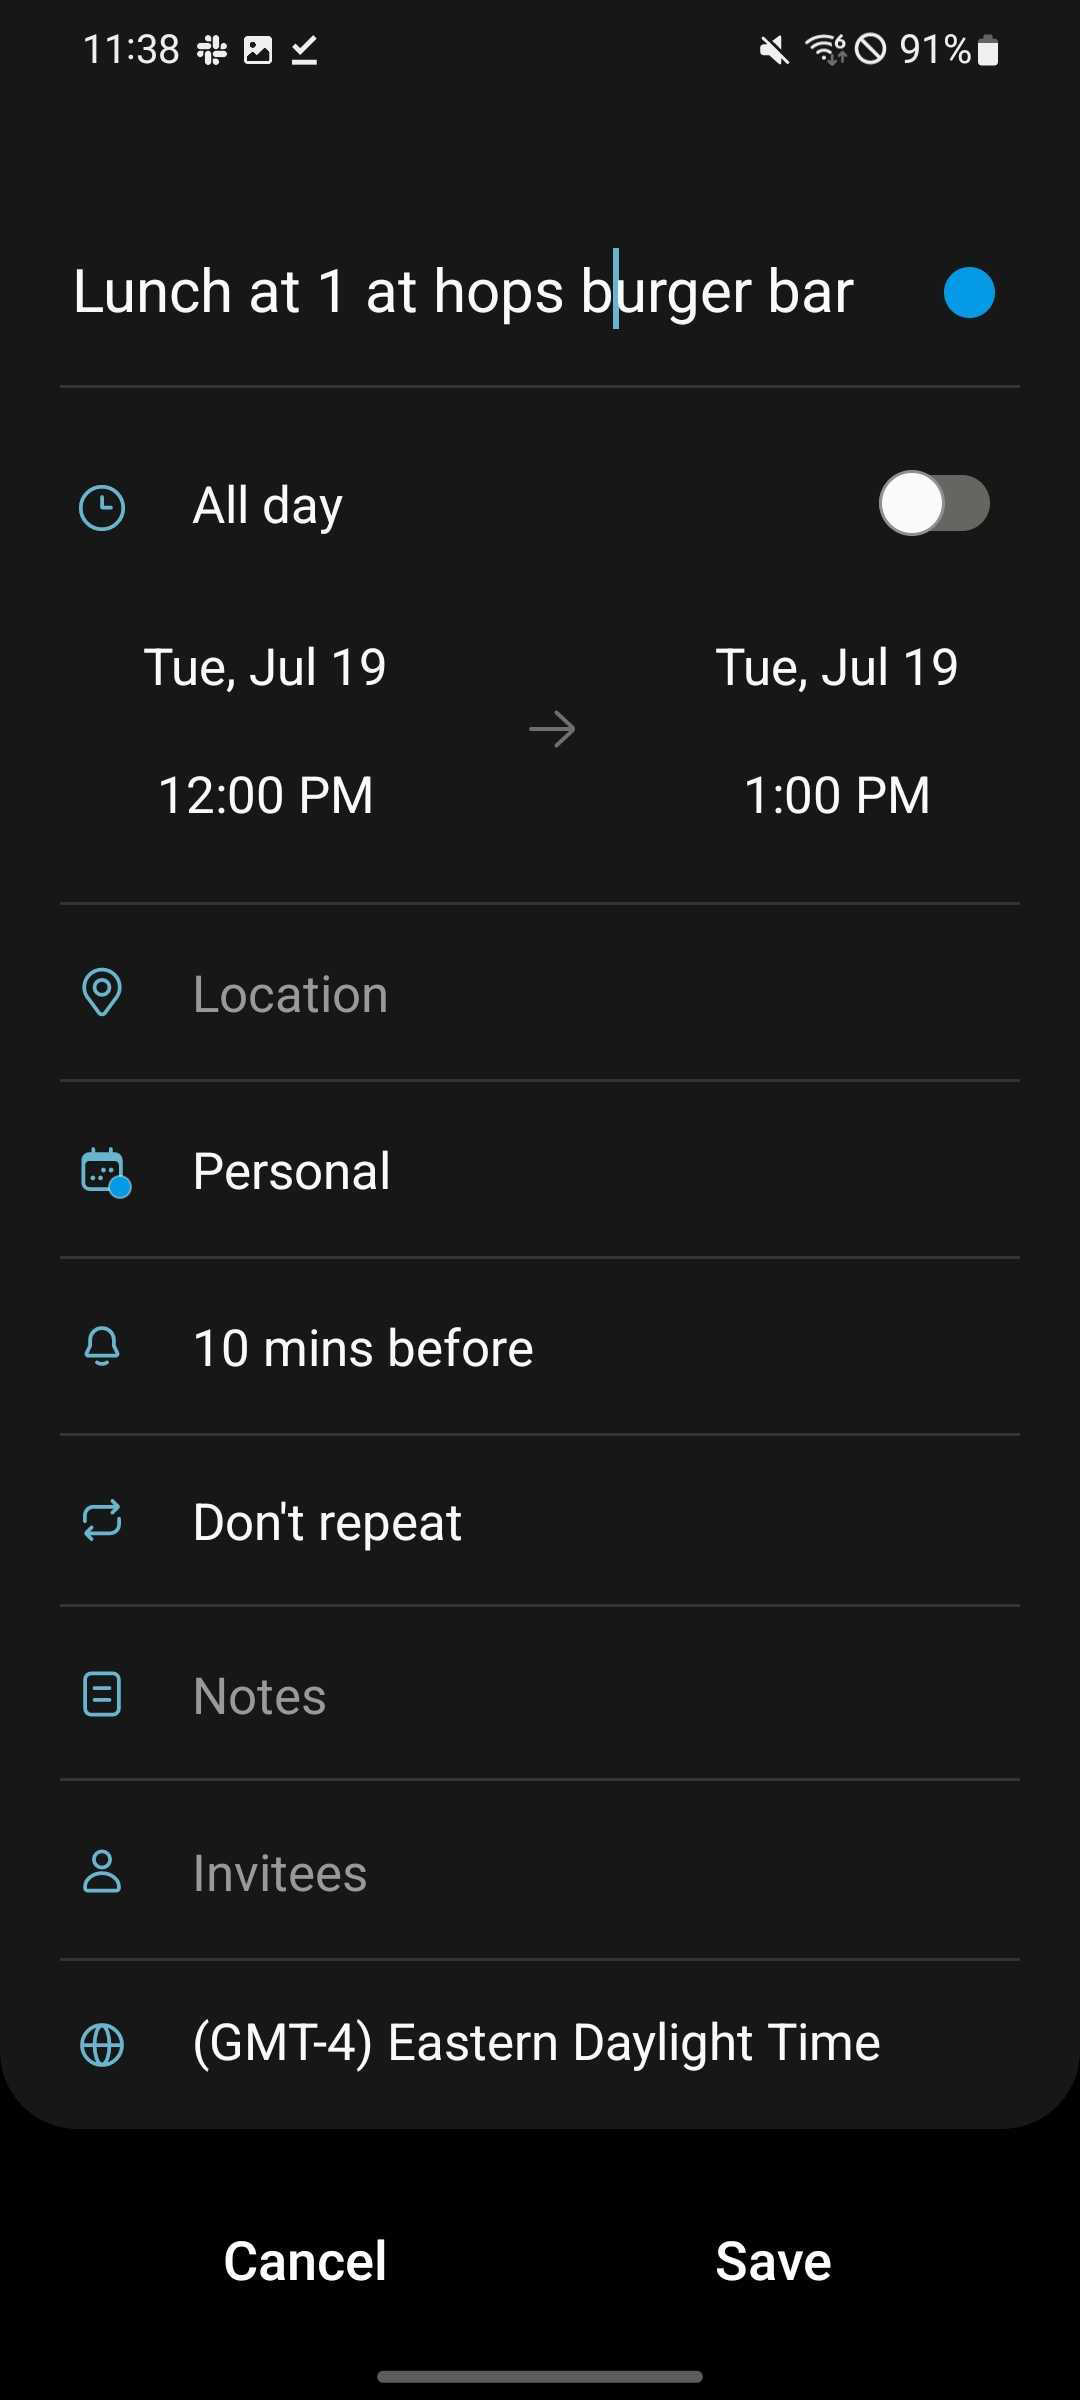 Samsung Calendar update brings recognition and group improvements